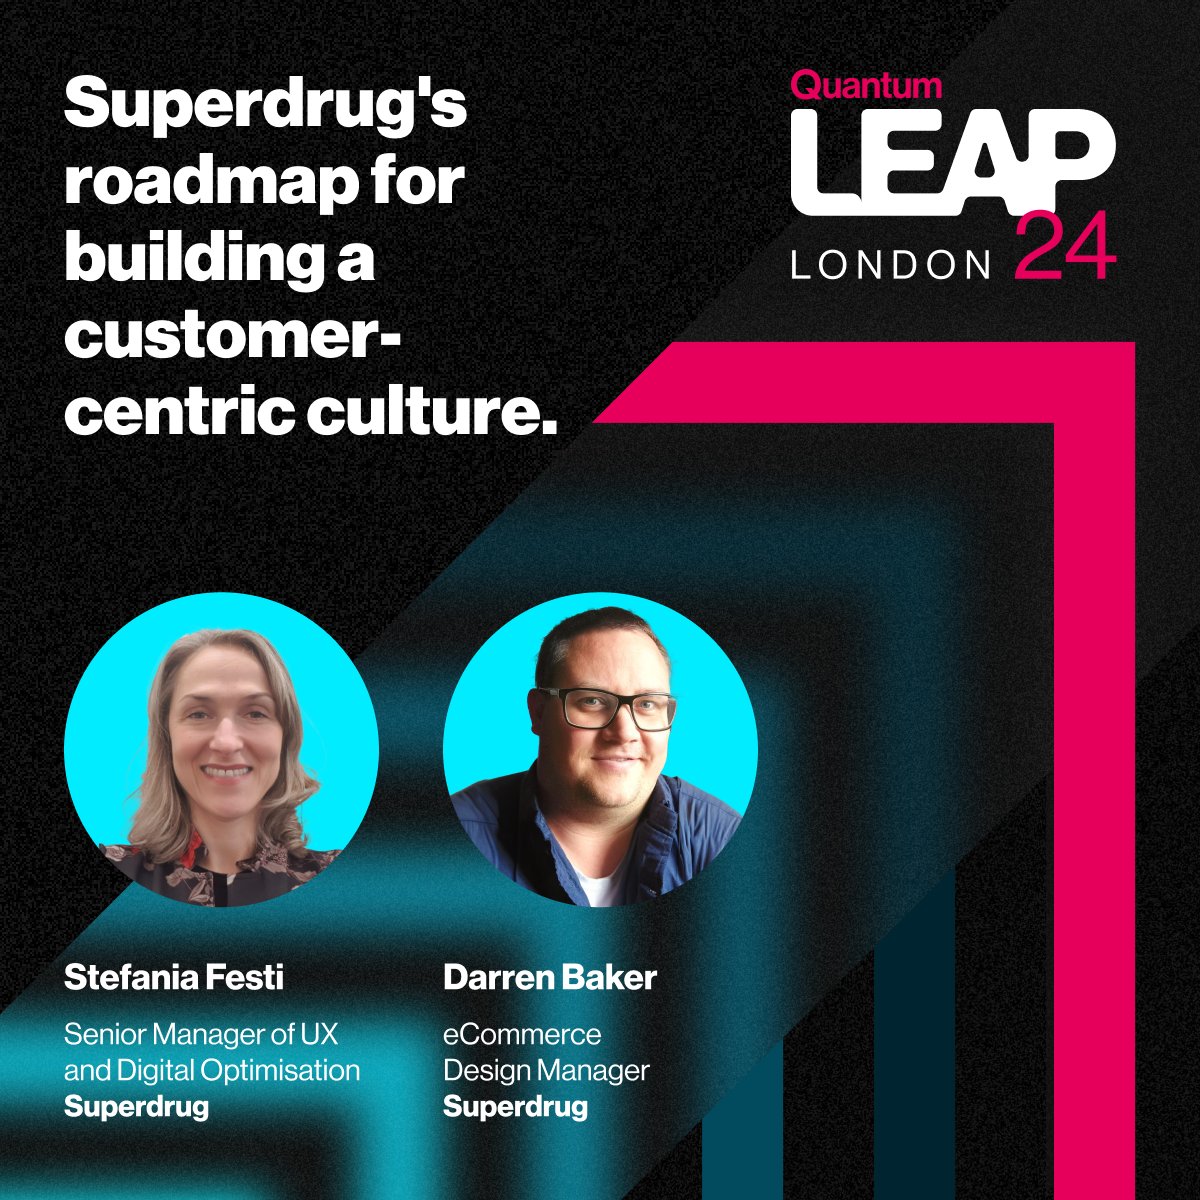 Are you ready to transform the way you listen to customers? Join us at Quantum Metric's LEAP into London on May 14th for an exclusive session on building a customer-centric culture with insights from Superdrug. Register now: hubs.ly/Q02vSlSp0 #leapintoldn